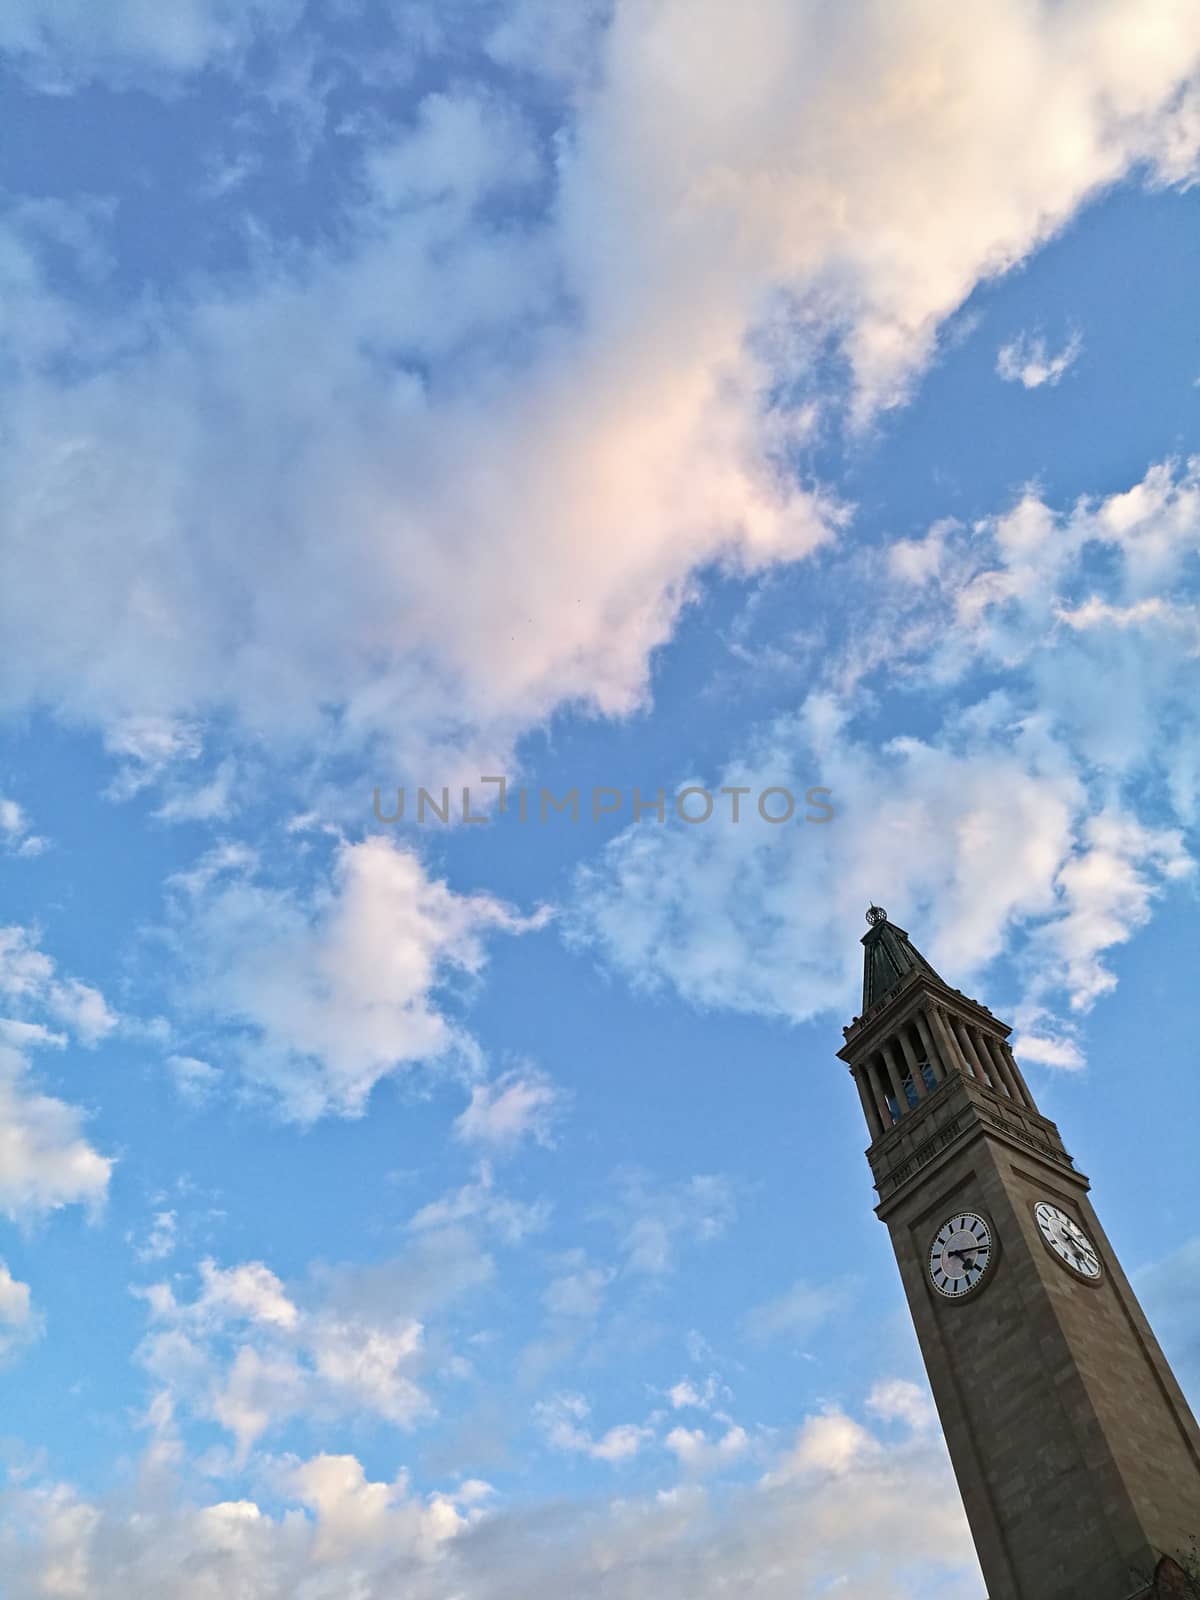 Old vintage classic tall clock tower with blue sky by eyeofpaul